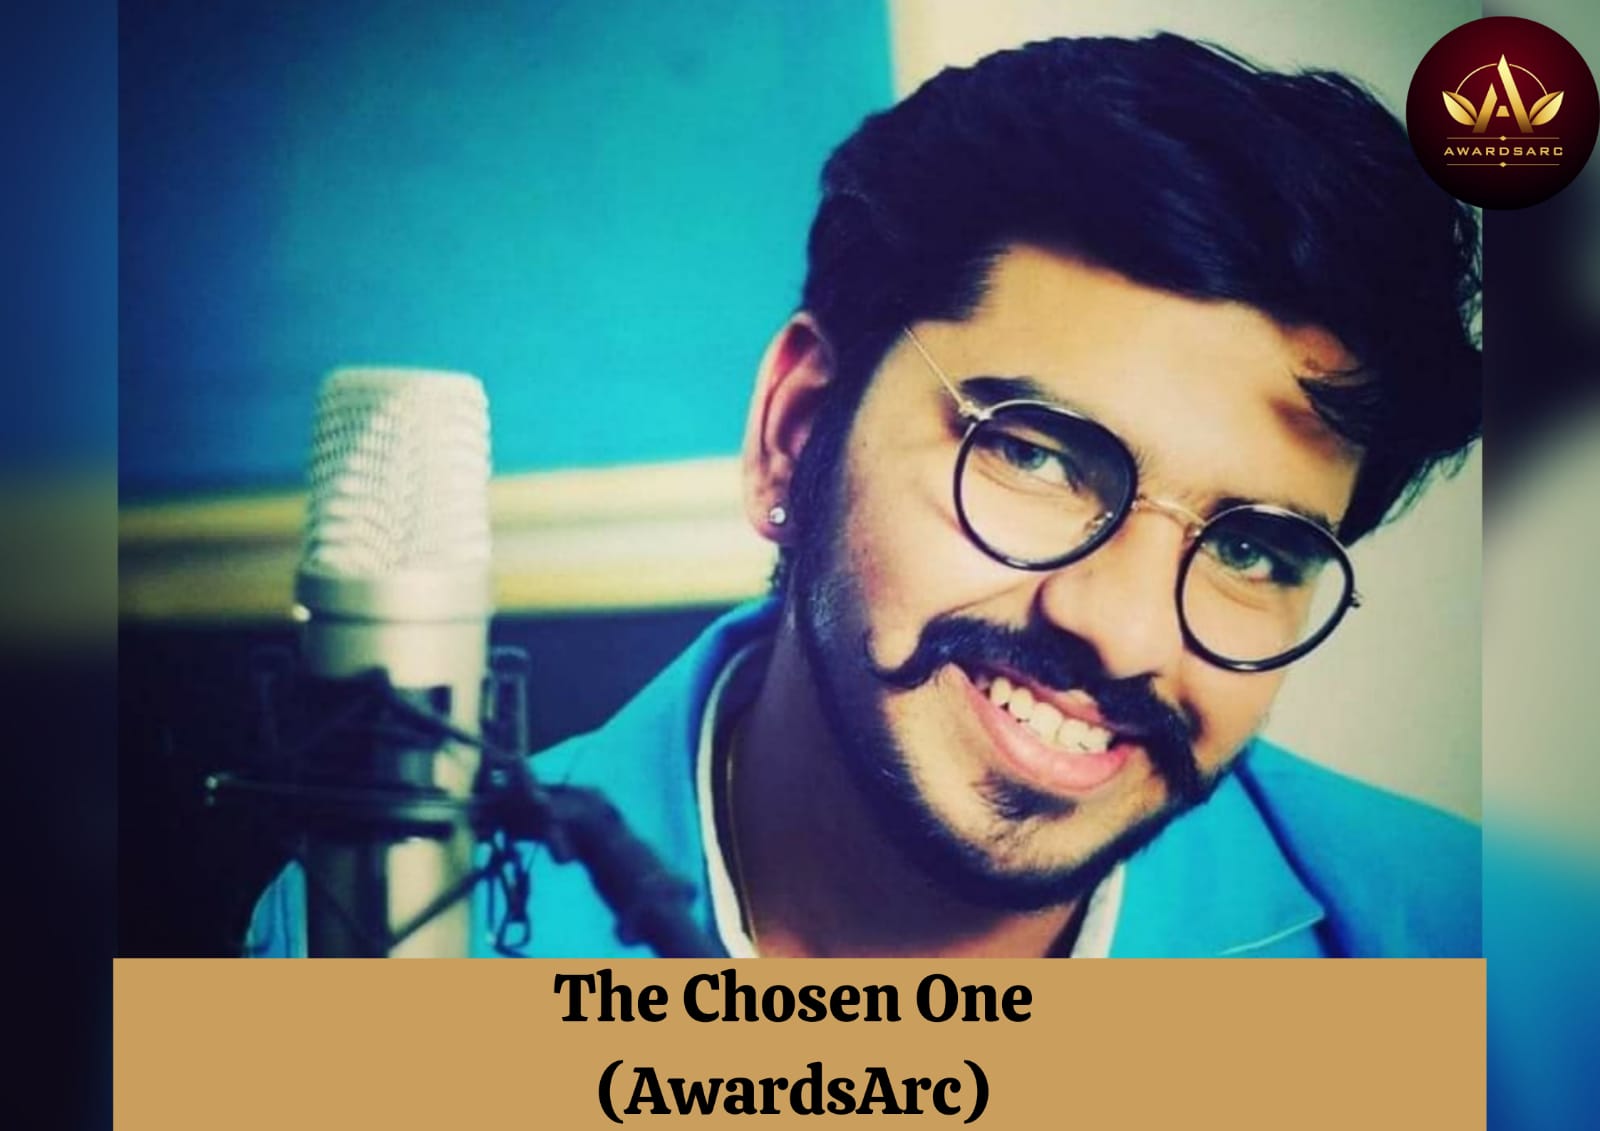 Yash Soni makes it to be one of THE CHOSEN ONES by AwardsArc.